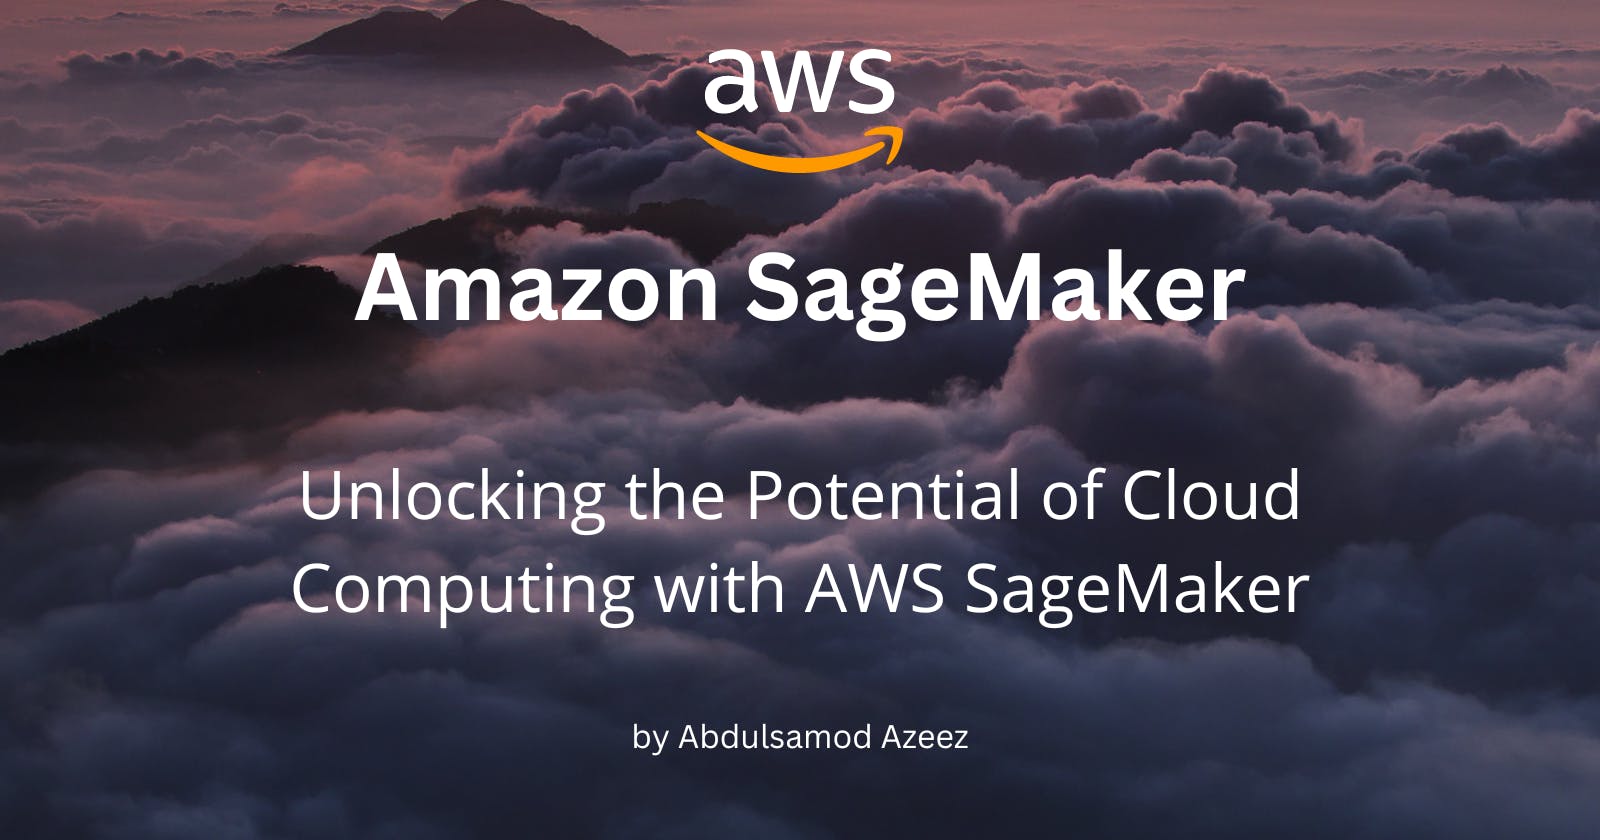 Unlocking the Potential of Cloud Computing with AWS SageMaker